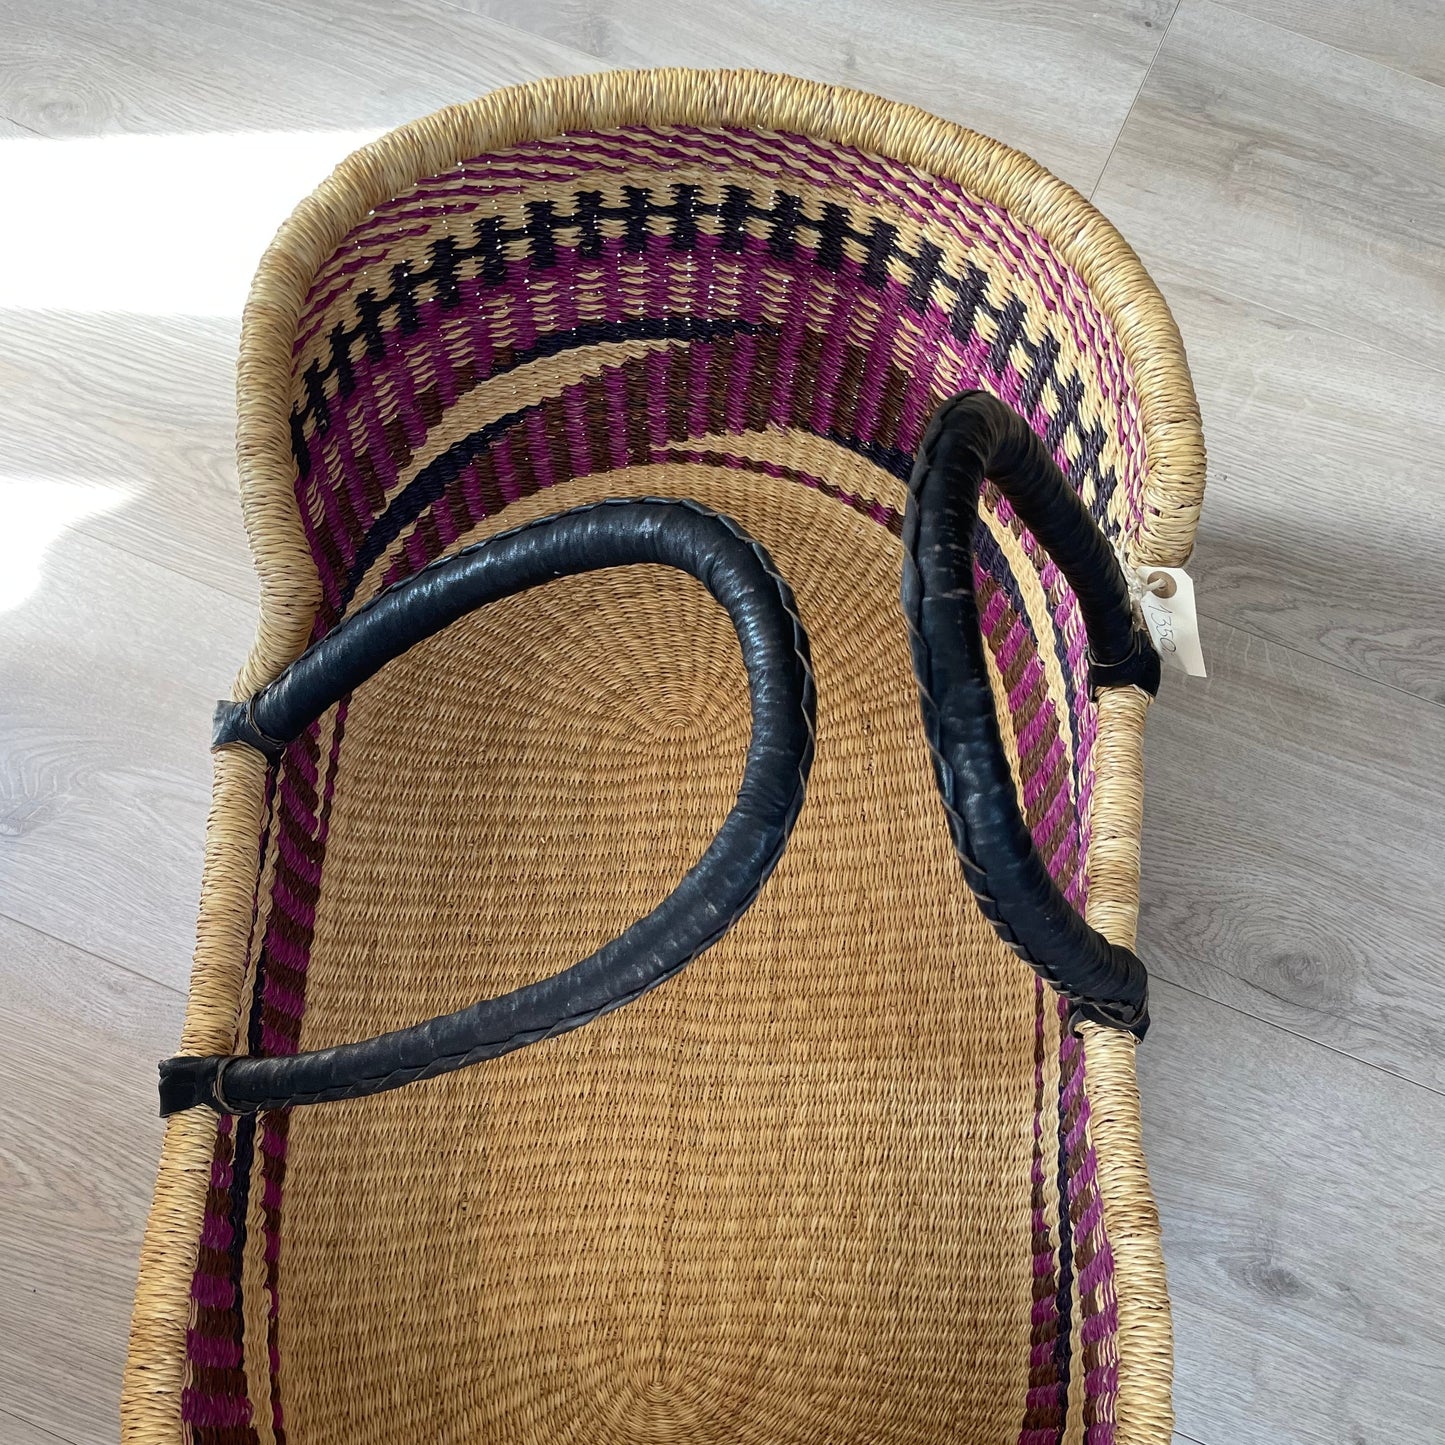 Baby lift (moss basket), woven in elephant grass, sustainable and Fair Trade from Ghana